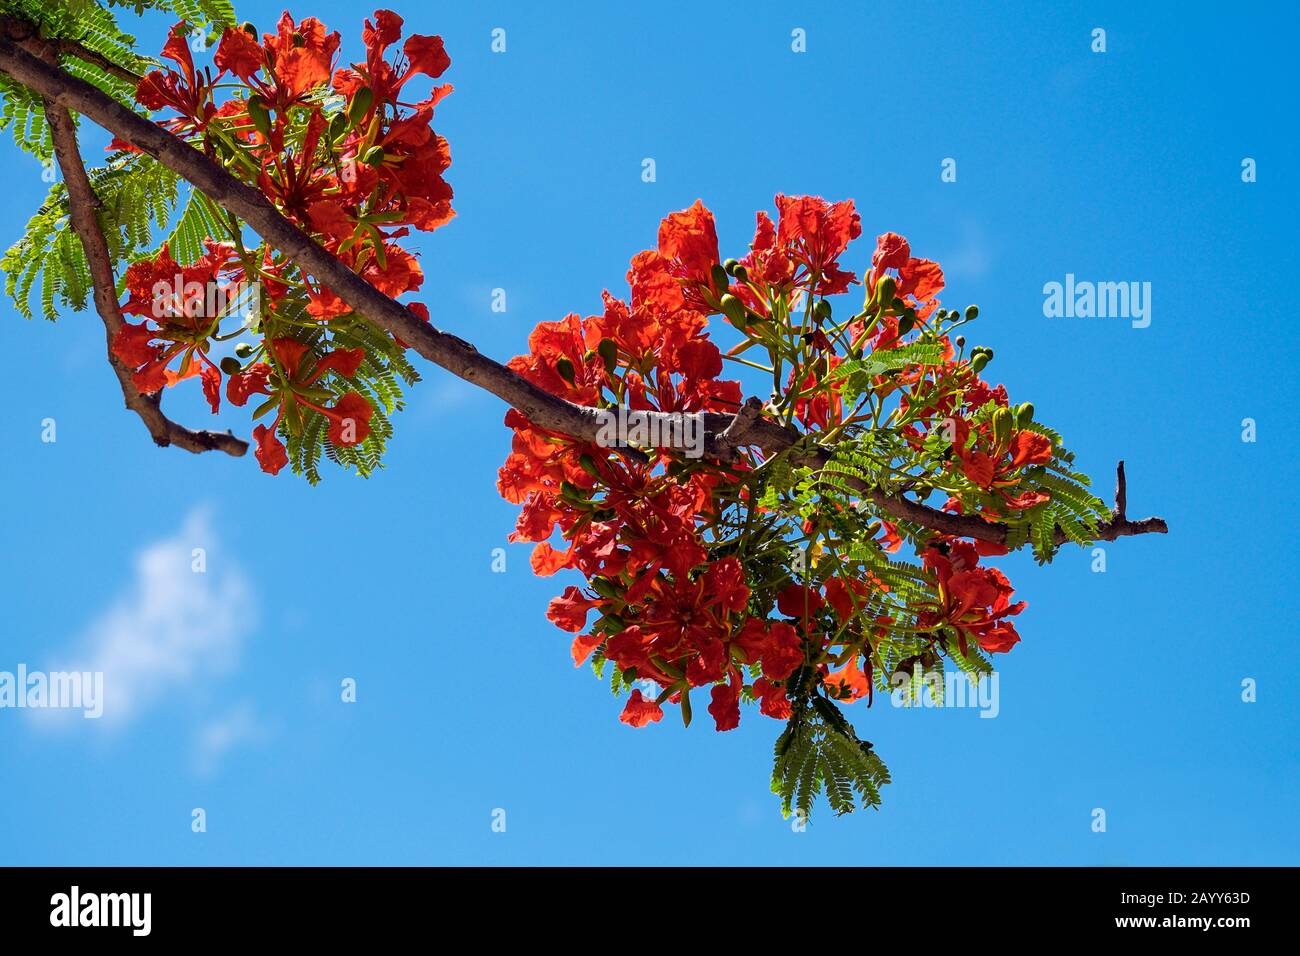 Flame tree flowers (Delonix regia) against a blue sky on Curieuse Island, Seychelles Stock Photo